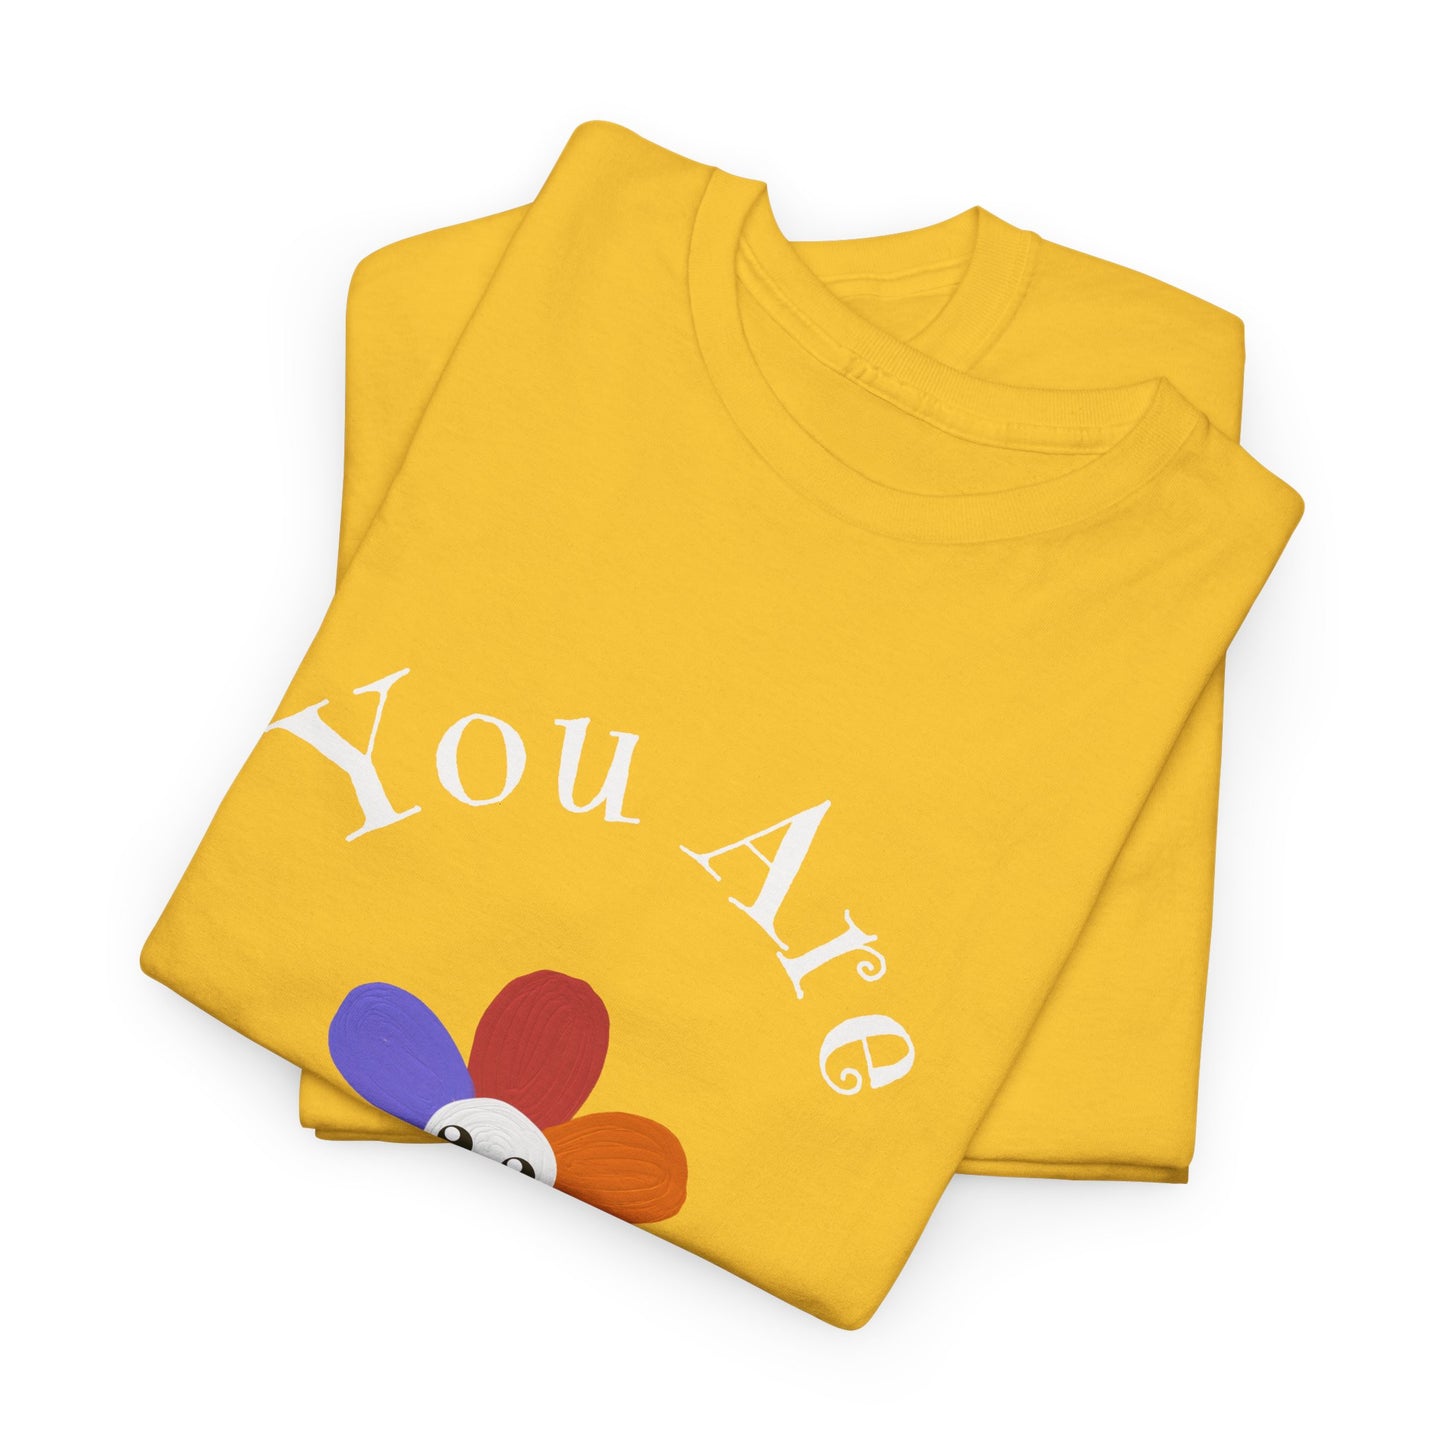 Unisex Heavy Cotton Graphic Design (You Are Beautiful) T-shirt